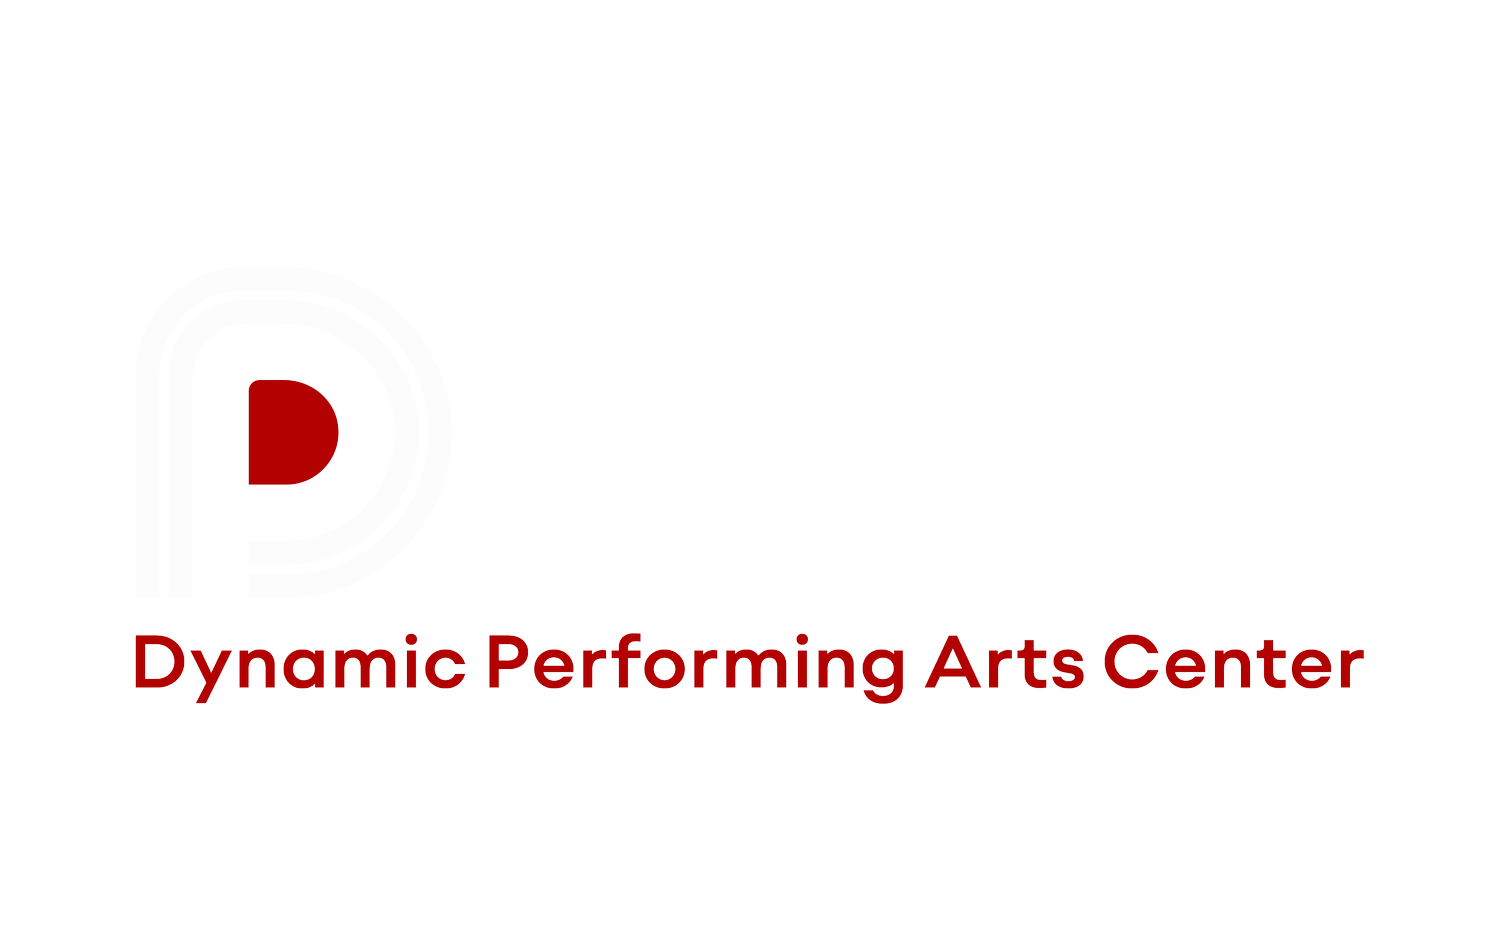 Dynamic Performing Arts Center